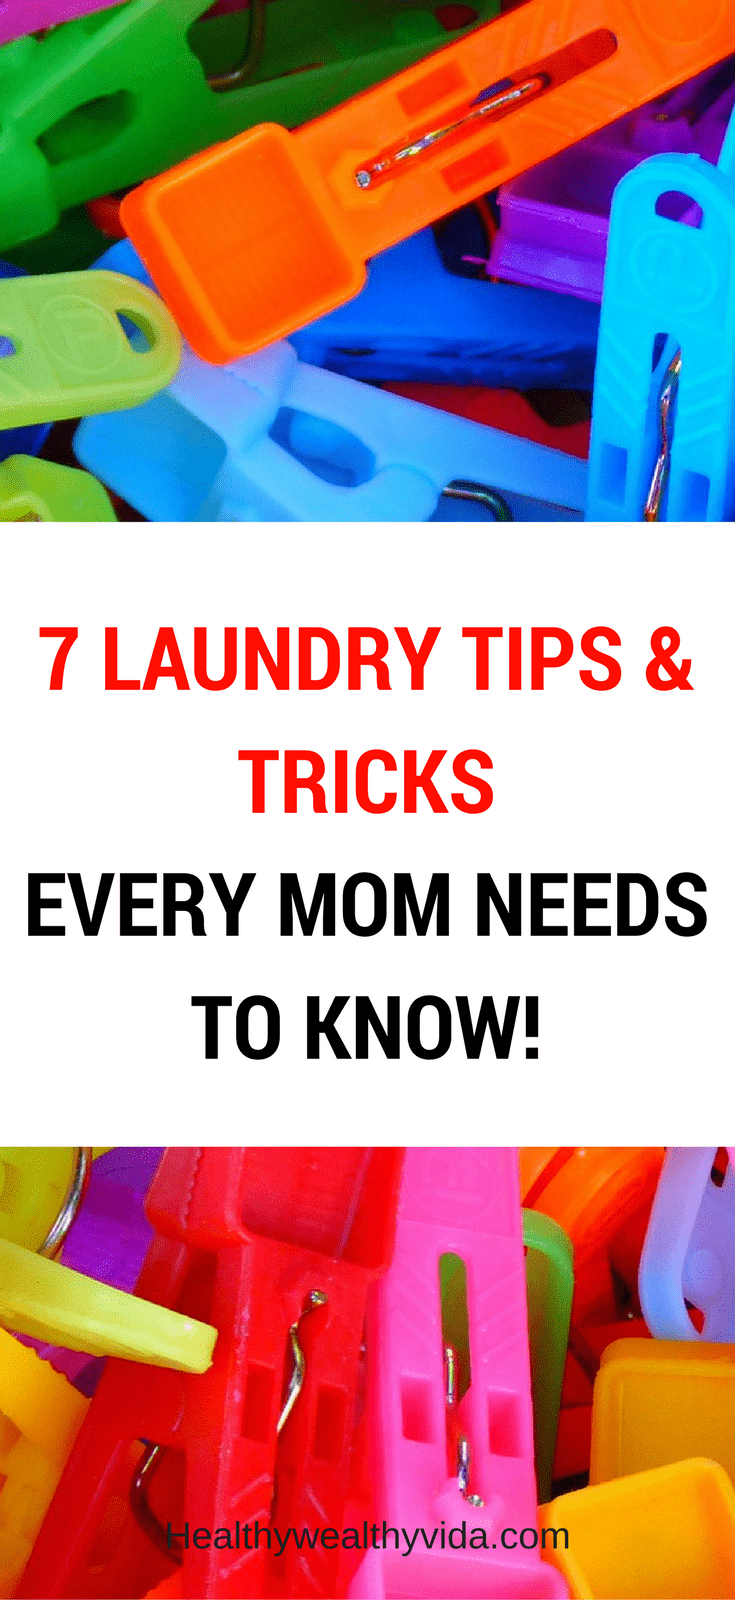 Battle of the Laundry Pile: How To Win Without Making The 